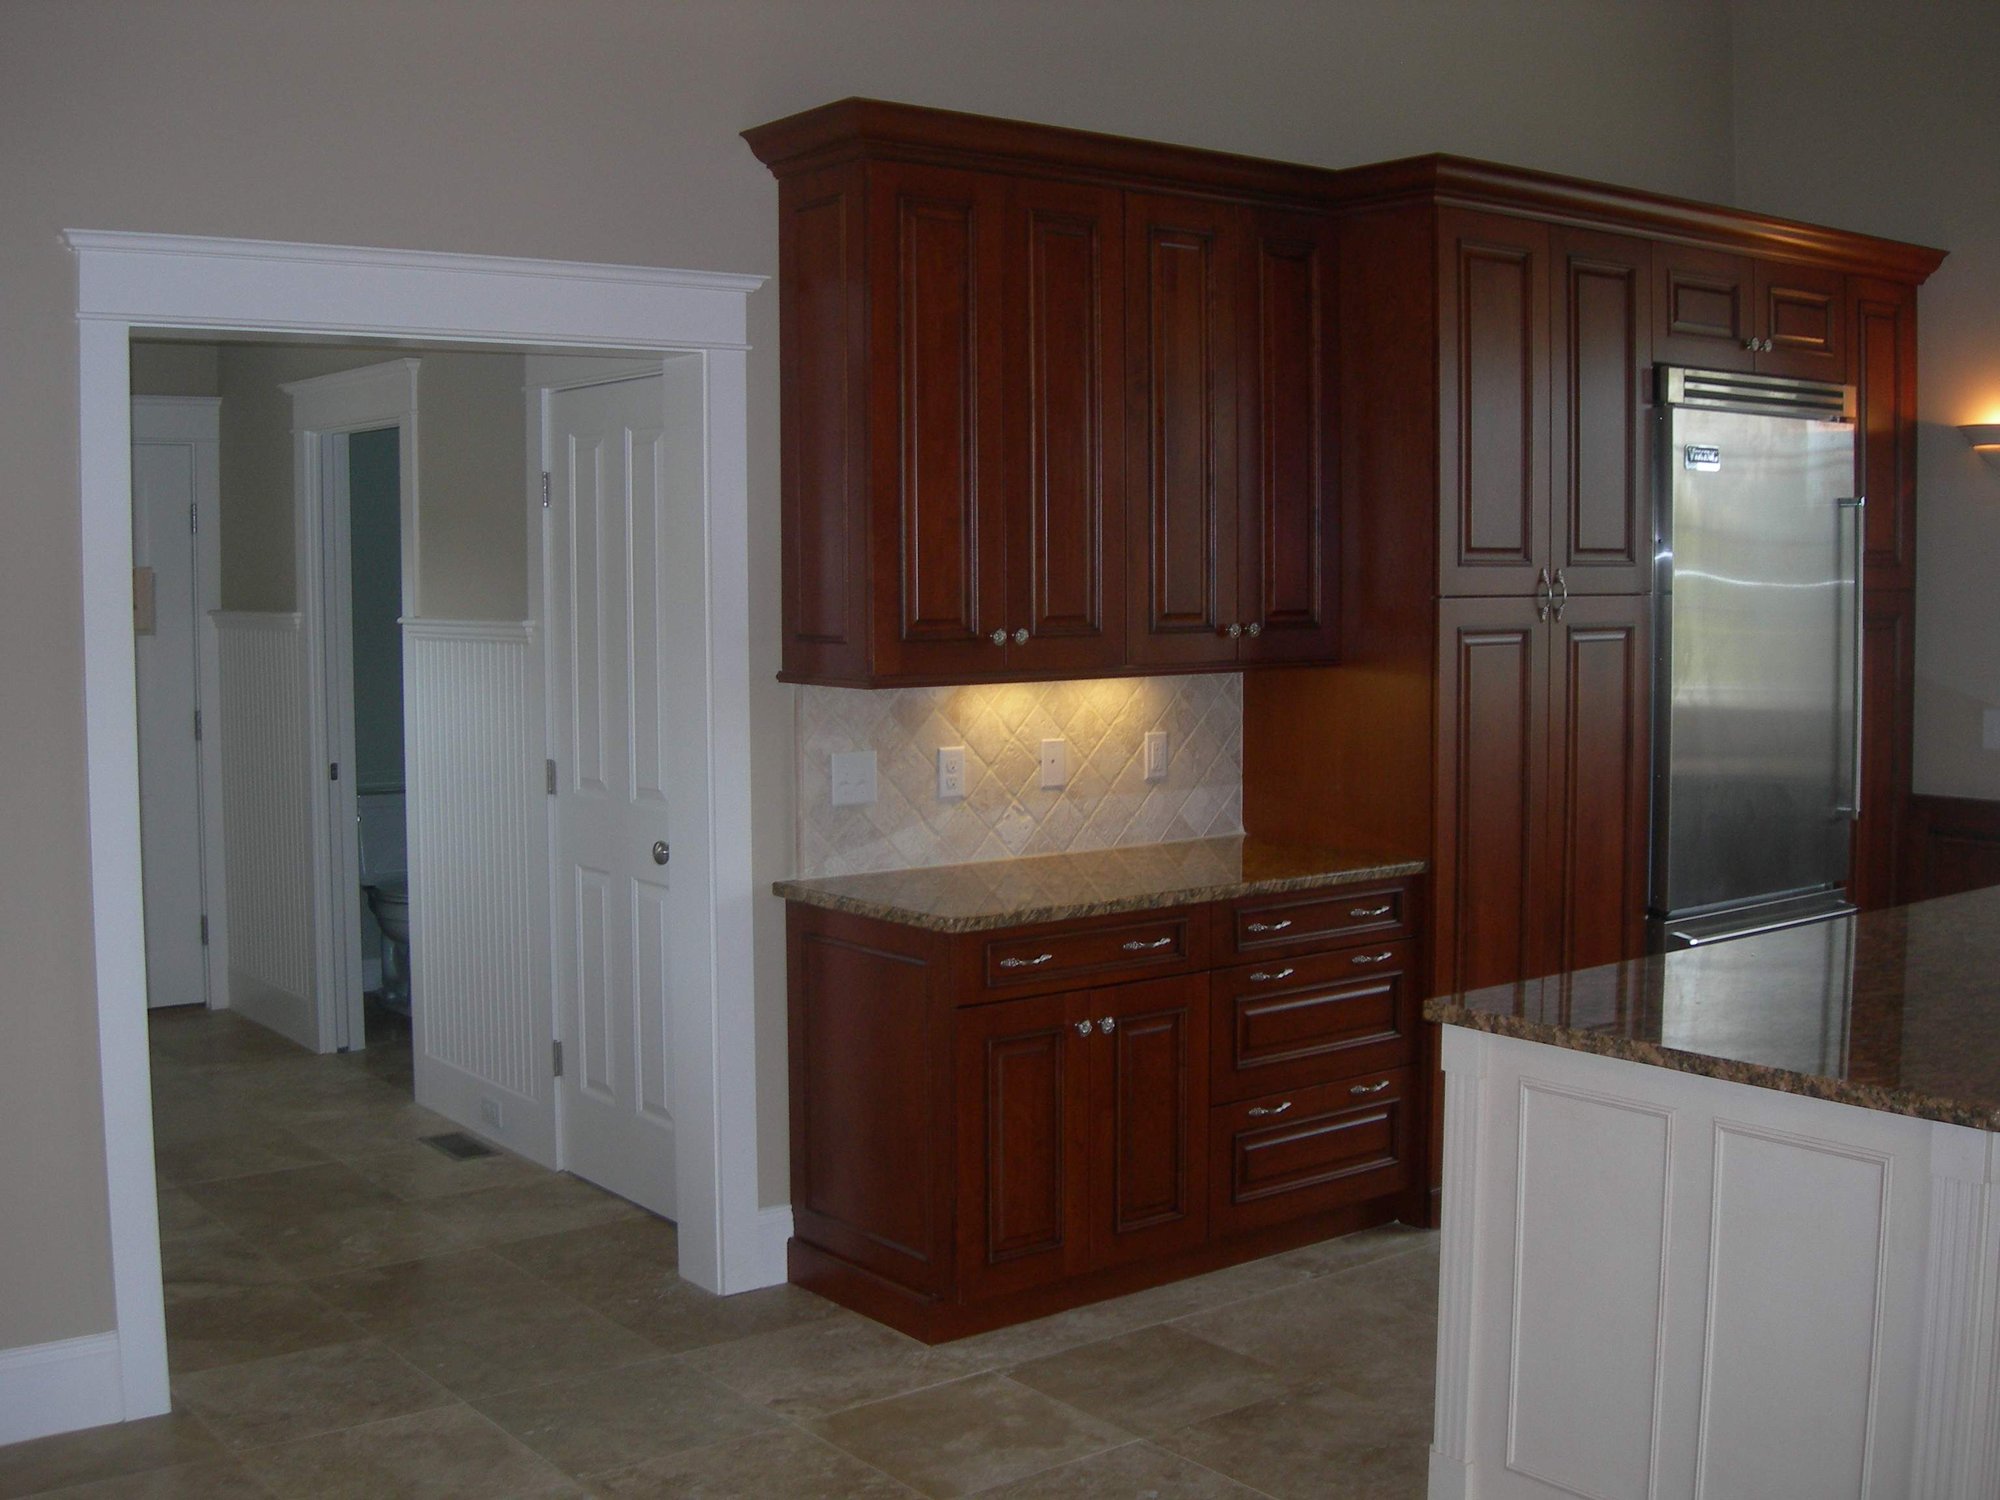 Tall Ceilings Elegant Cabinetry - Pre